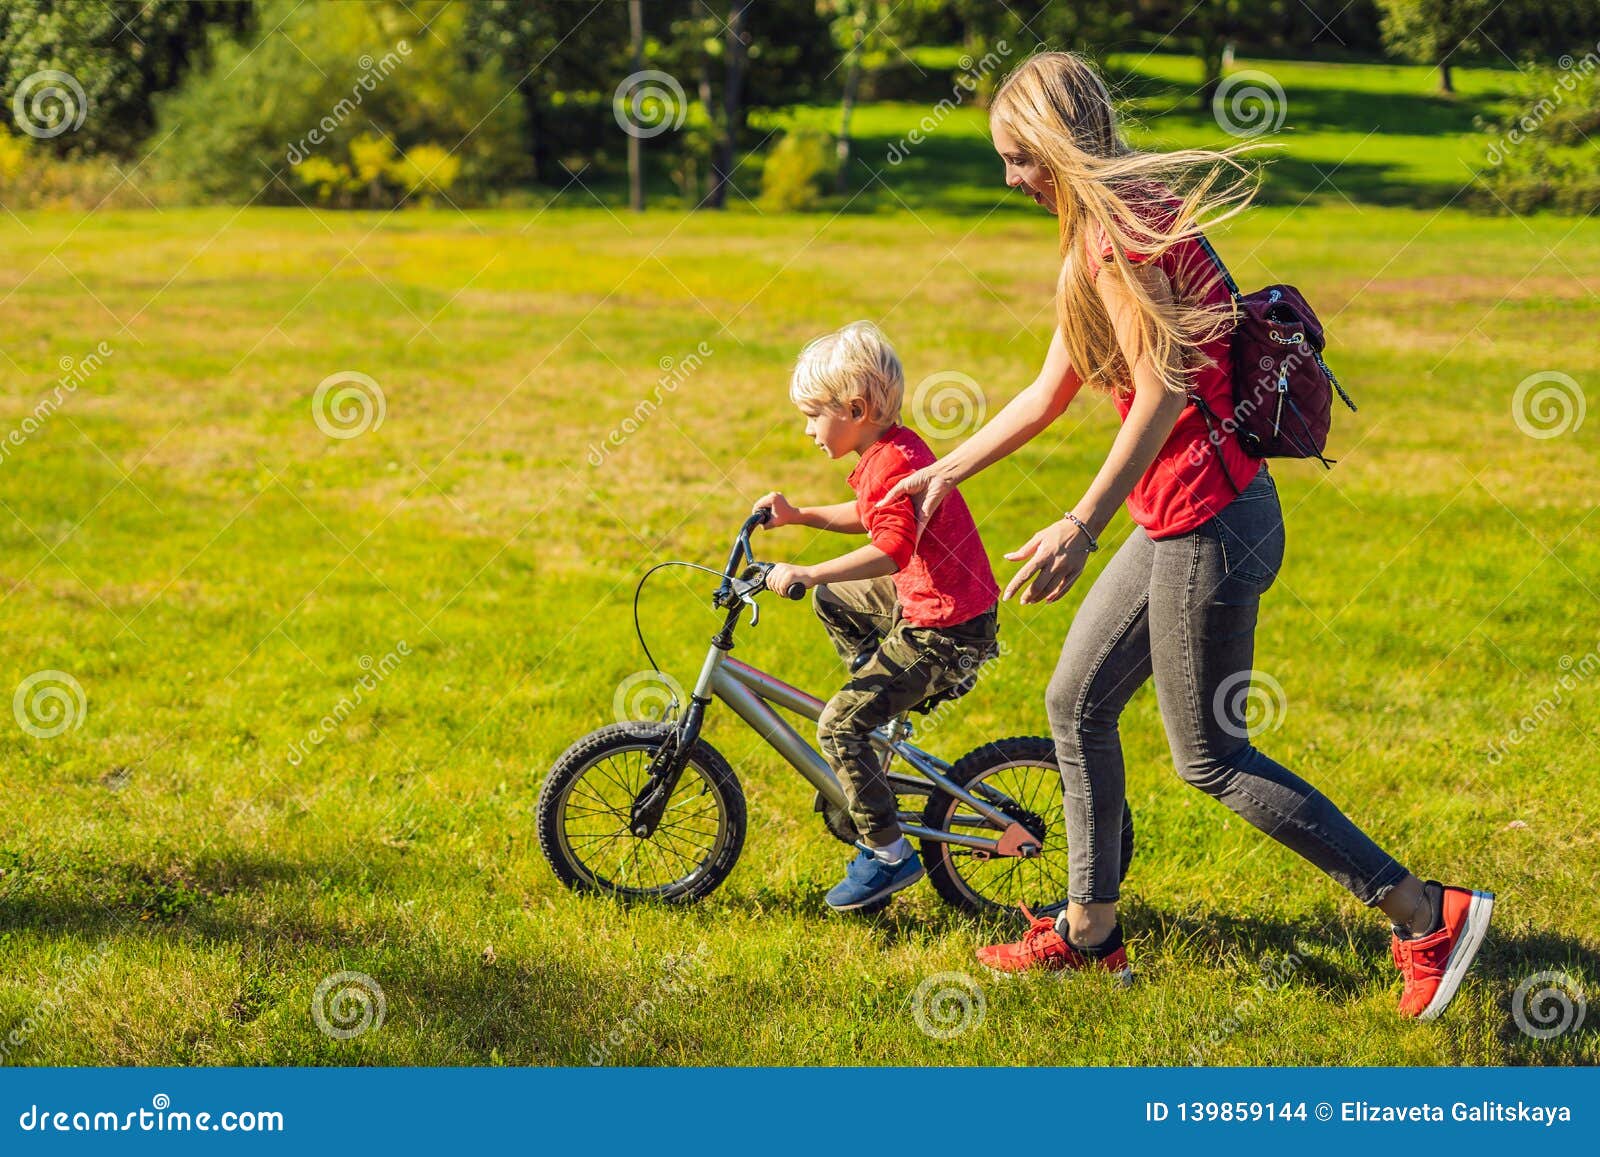 Young Mother Teaching Her Son How To Ride A Bicycle In The Park Stock ...